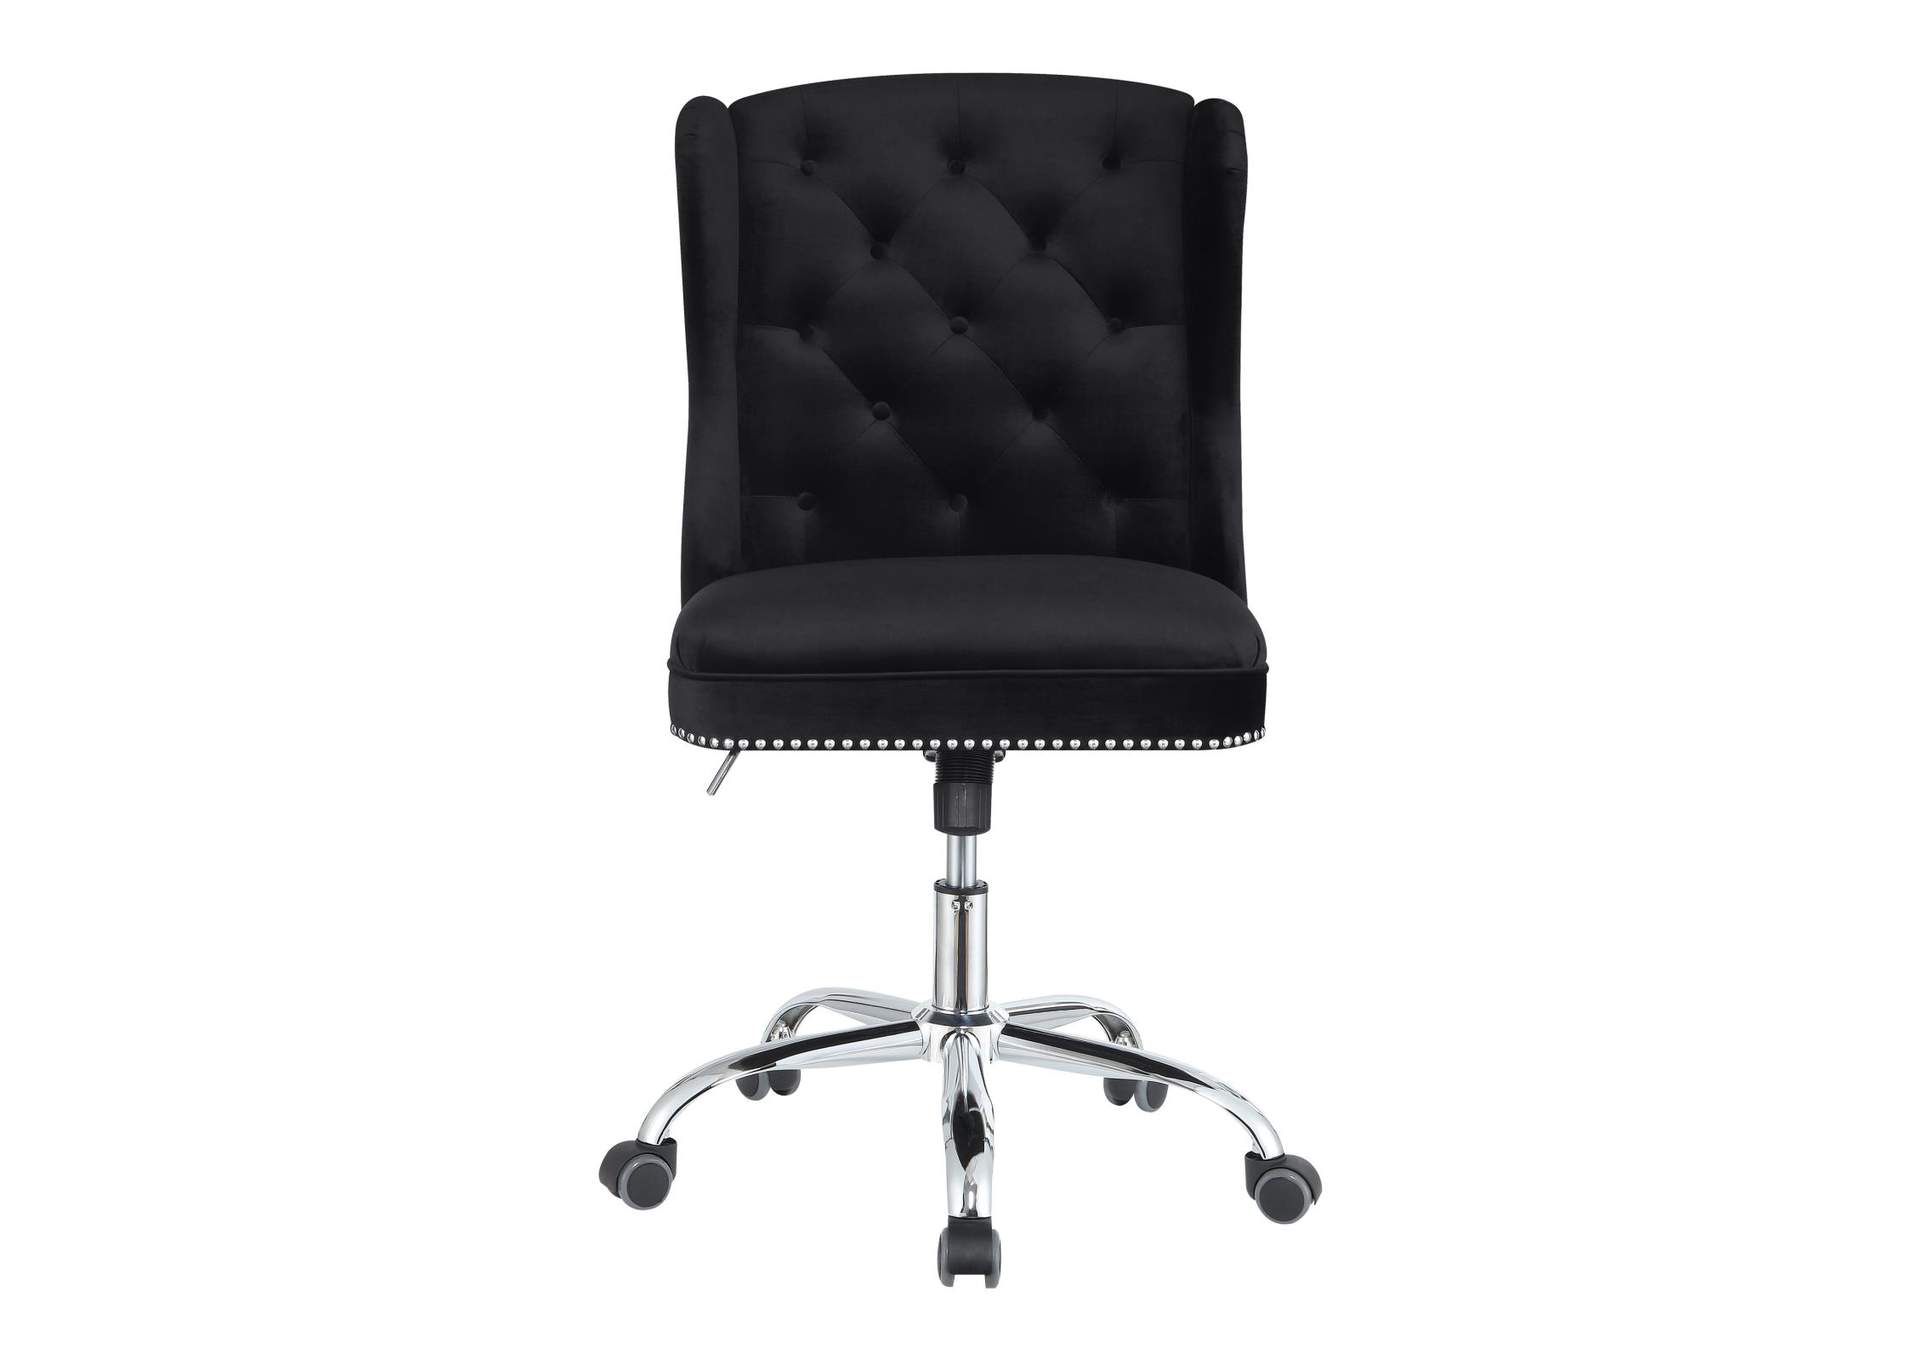 Upholstered Tufted Office Chair Black and Chrome,Coaster Furniture